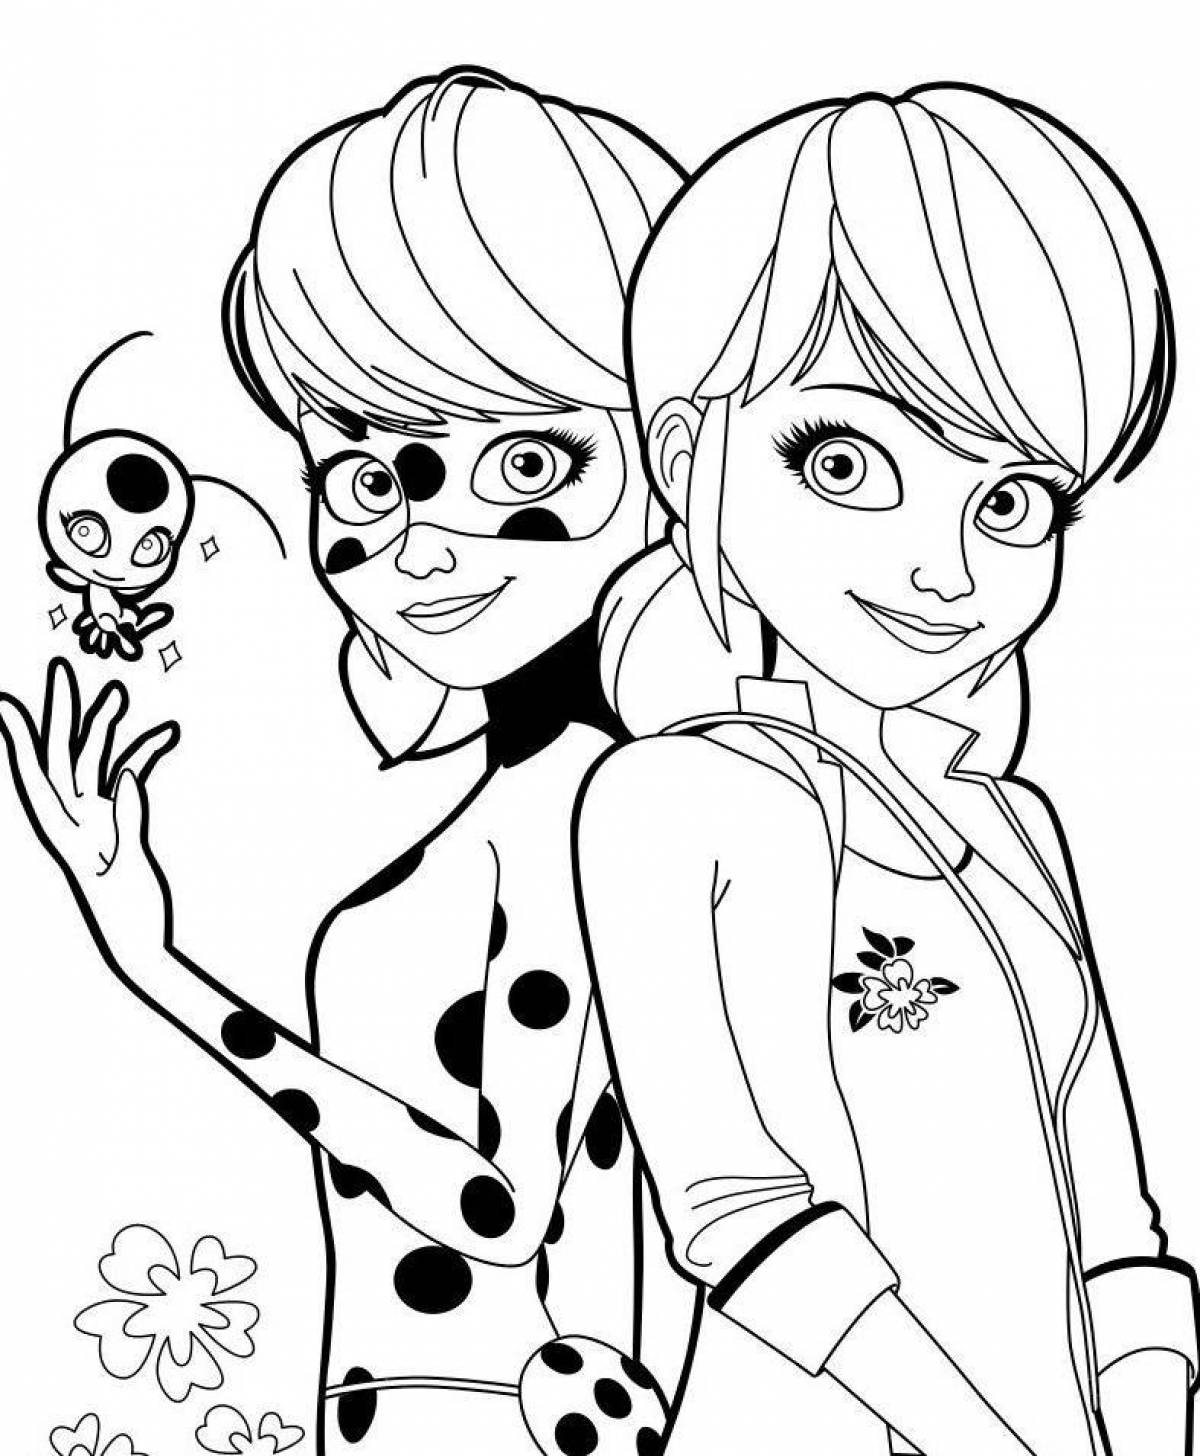 Fun coloring book of ladybug and super cat for kids